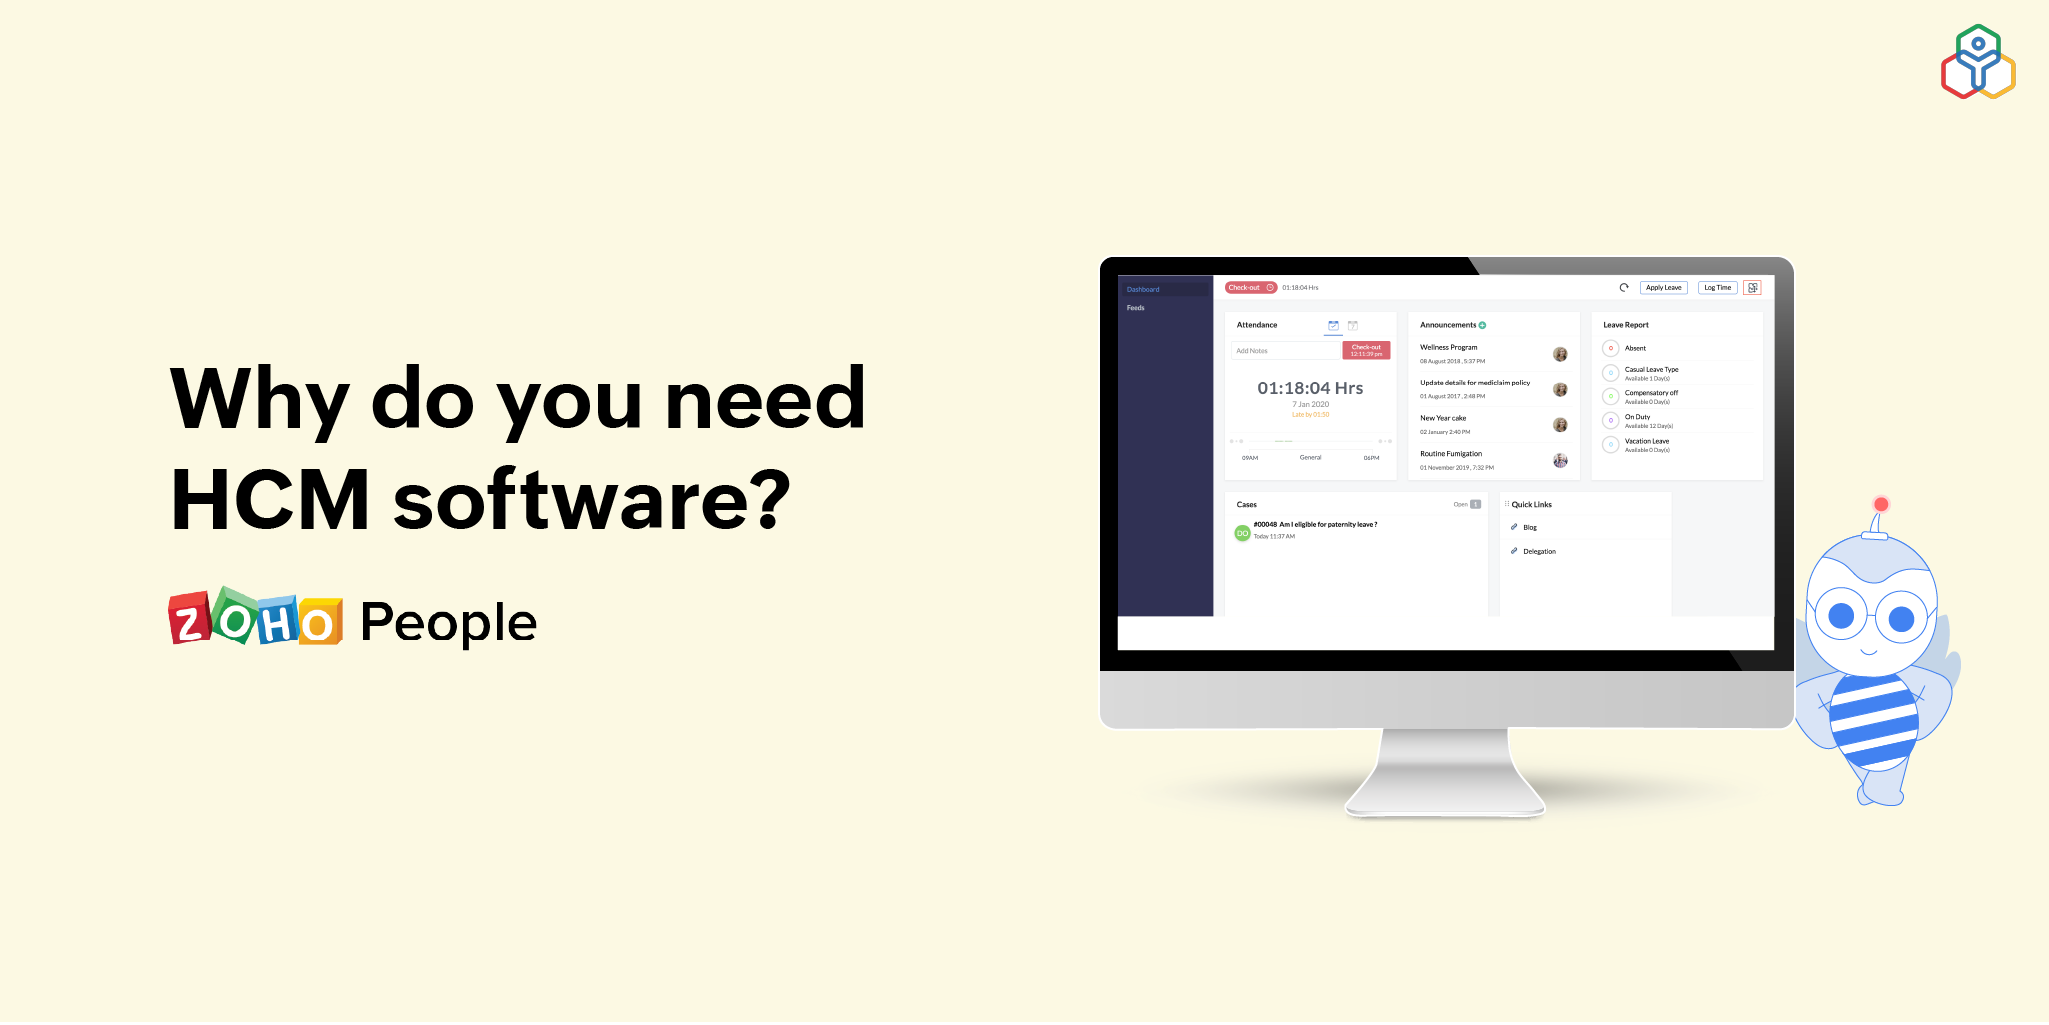 Why do you need HCM software?